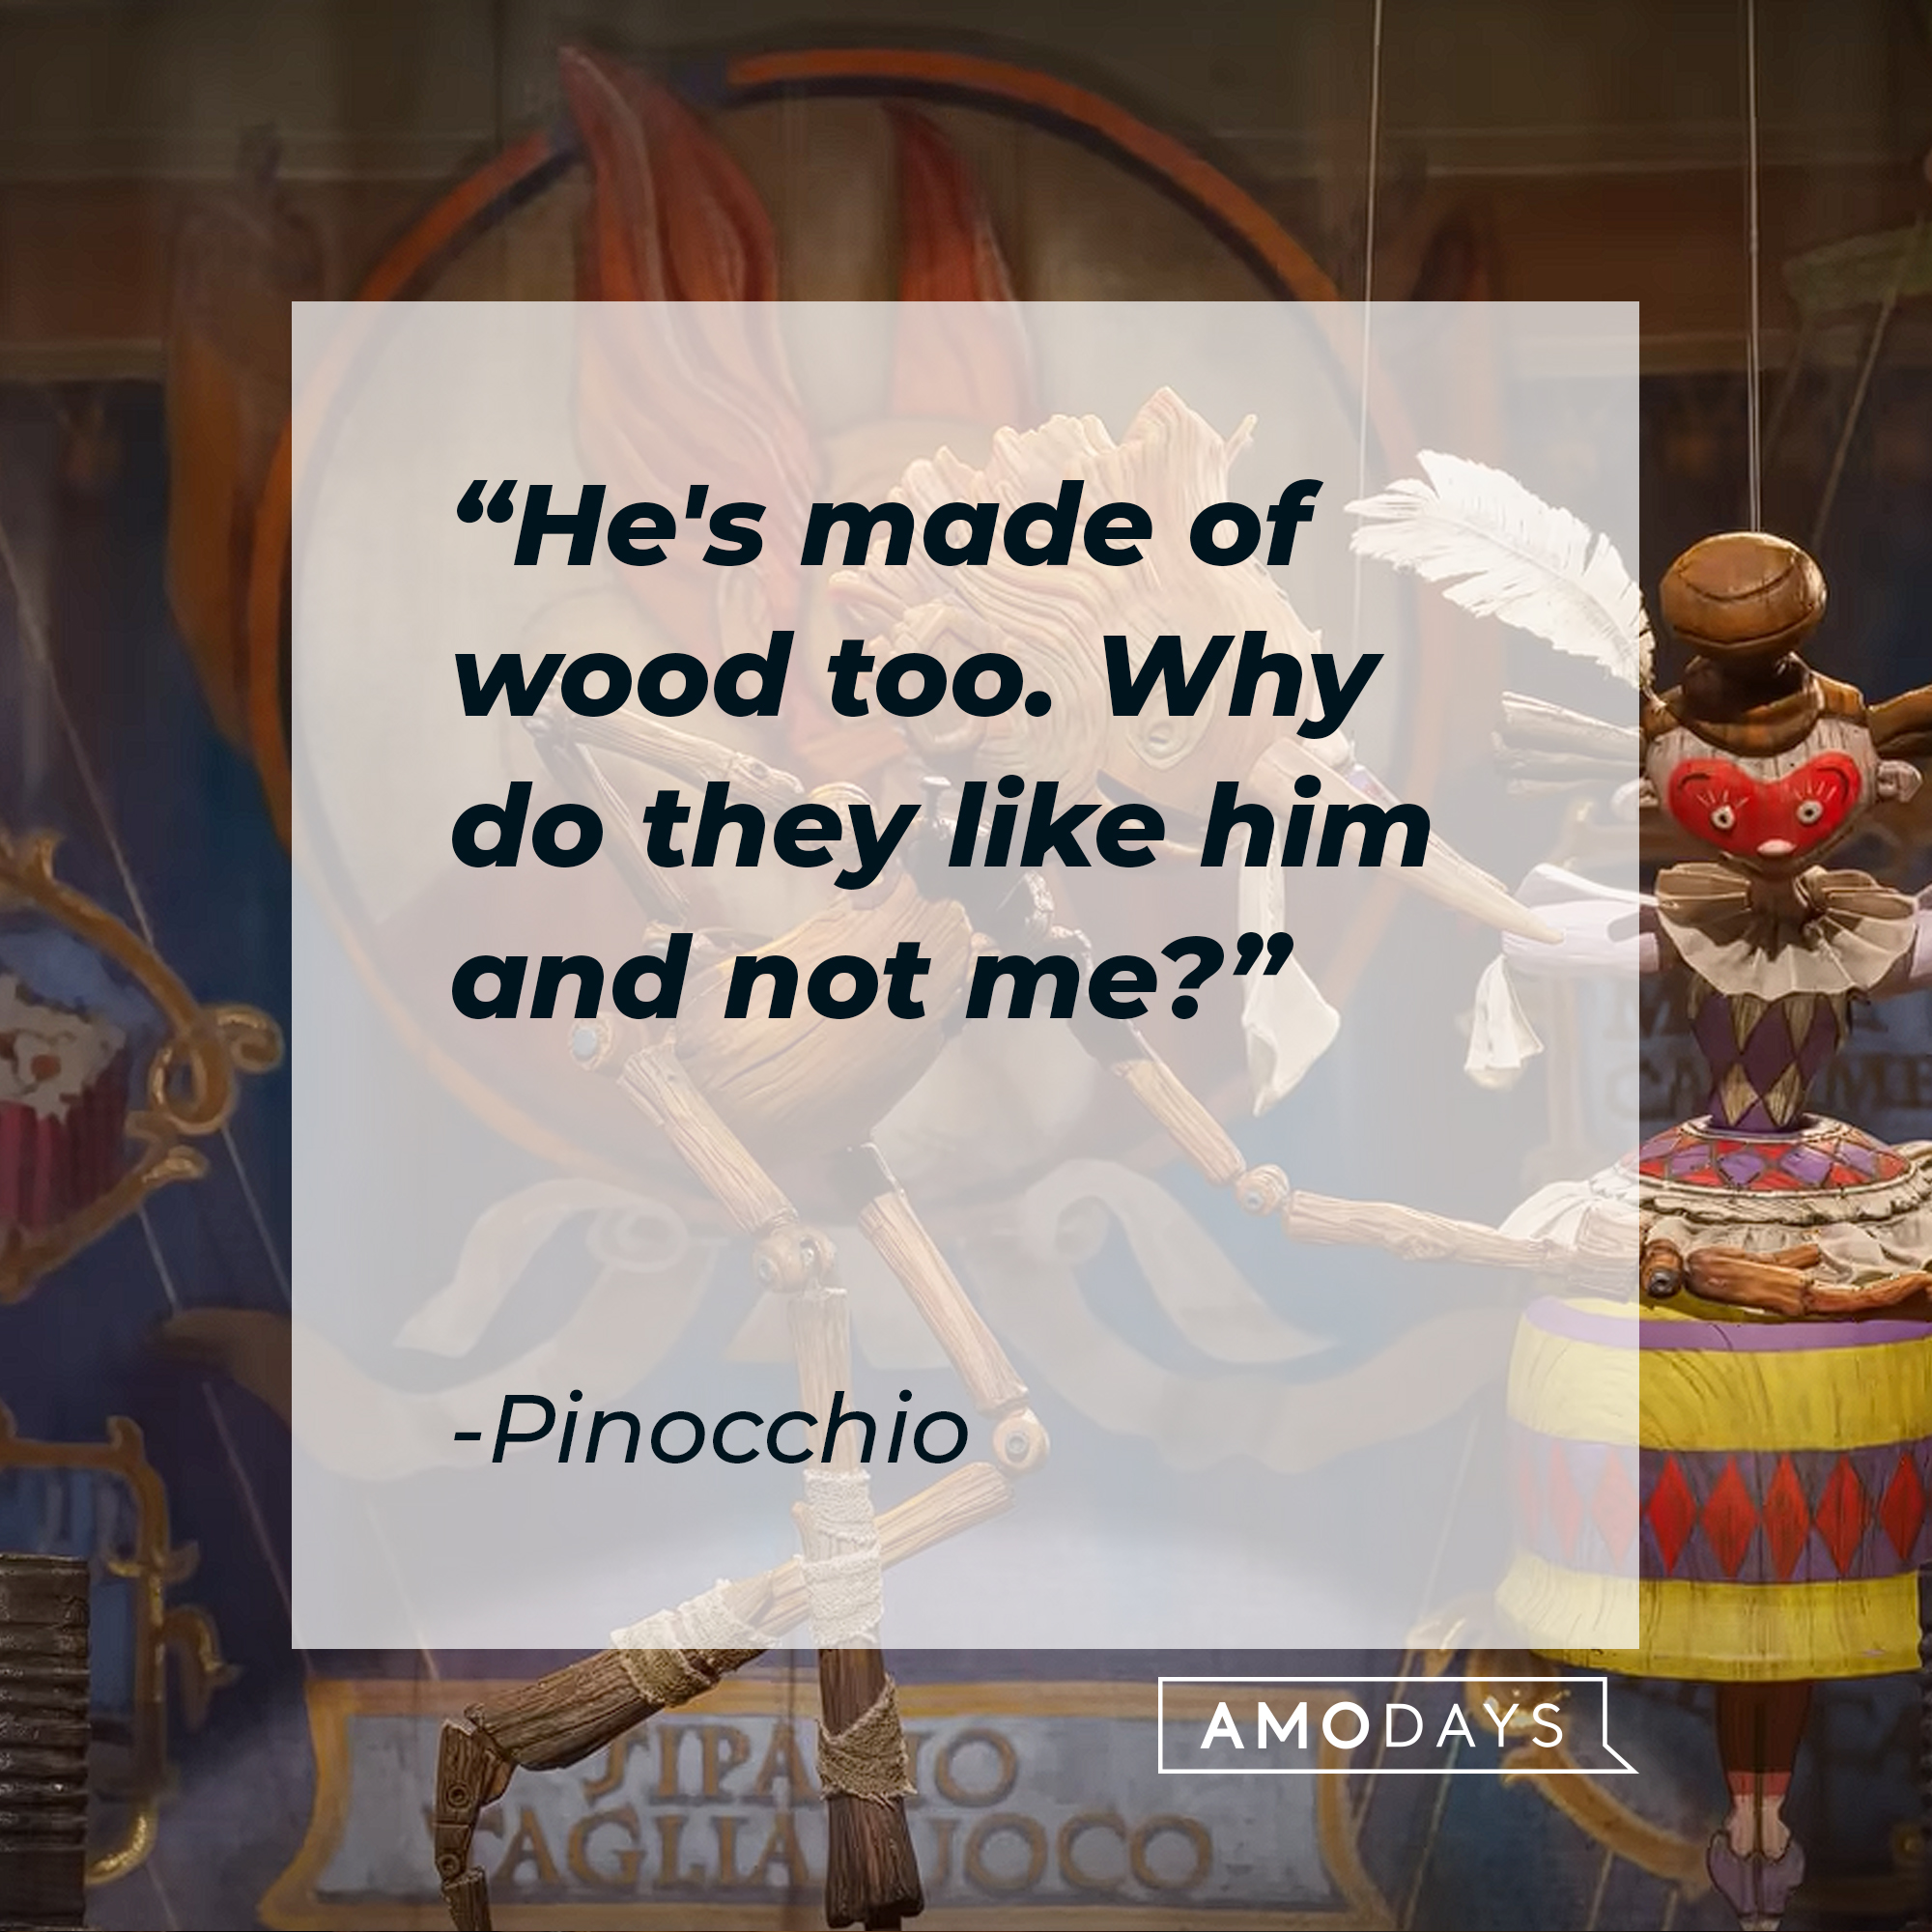 Pinocchio's quote: "He's made of wood too. Why do they like him and not me?" | Image: AmoDays